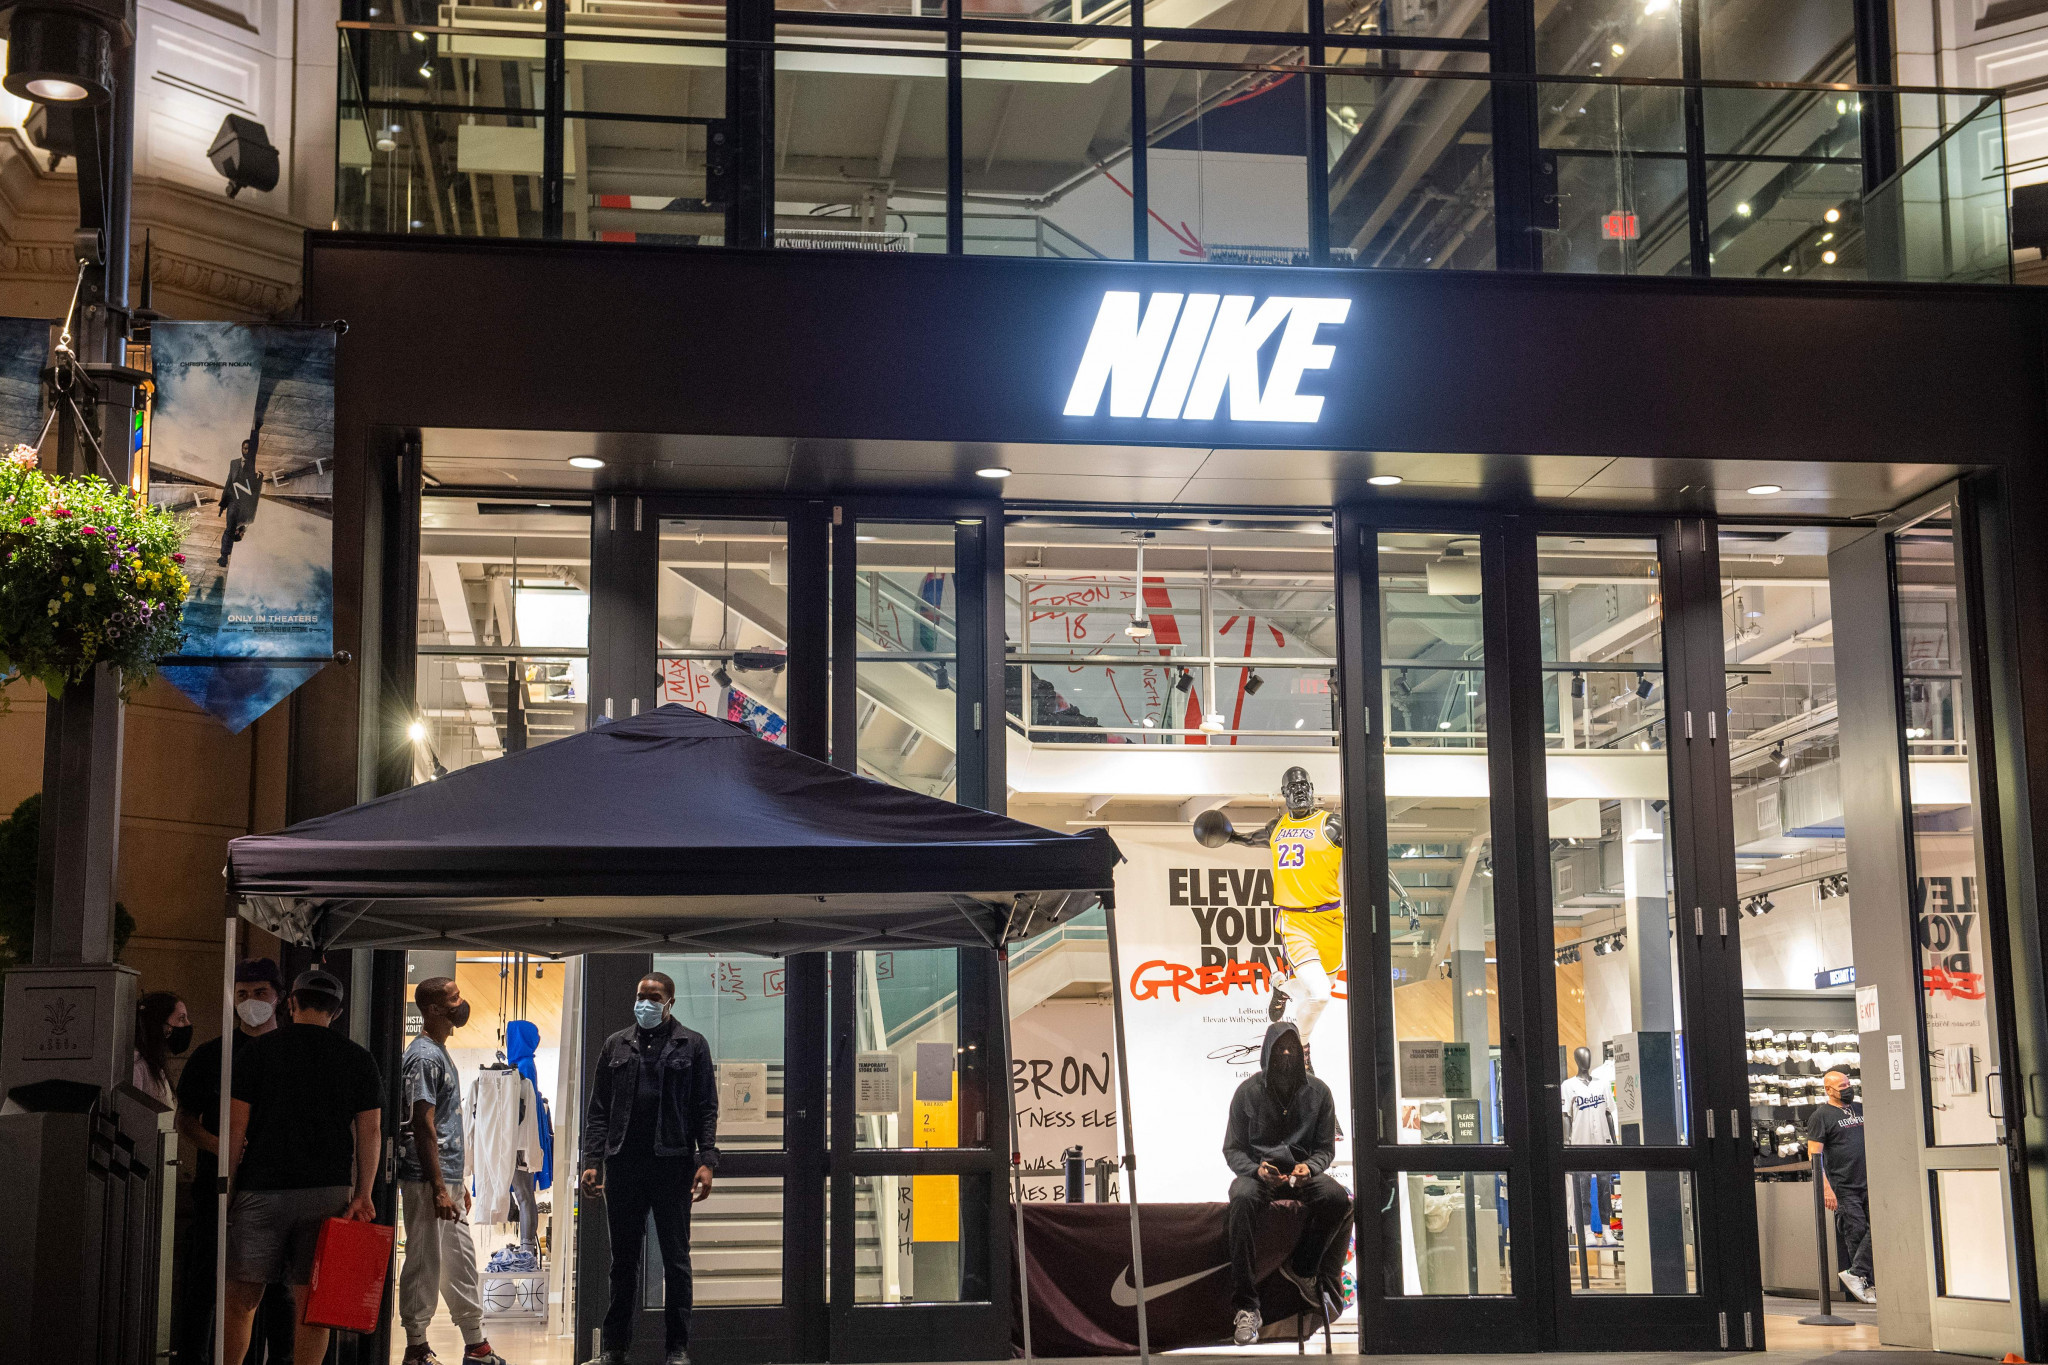 Nike increase number of planned layoffs at headquarters in Oregon